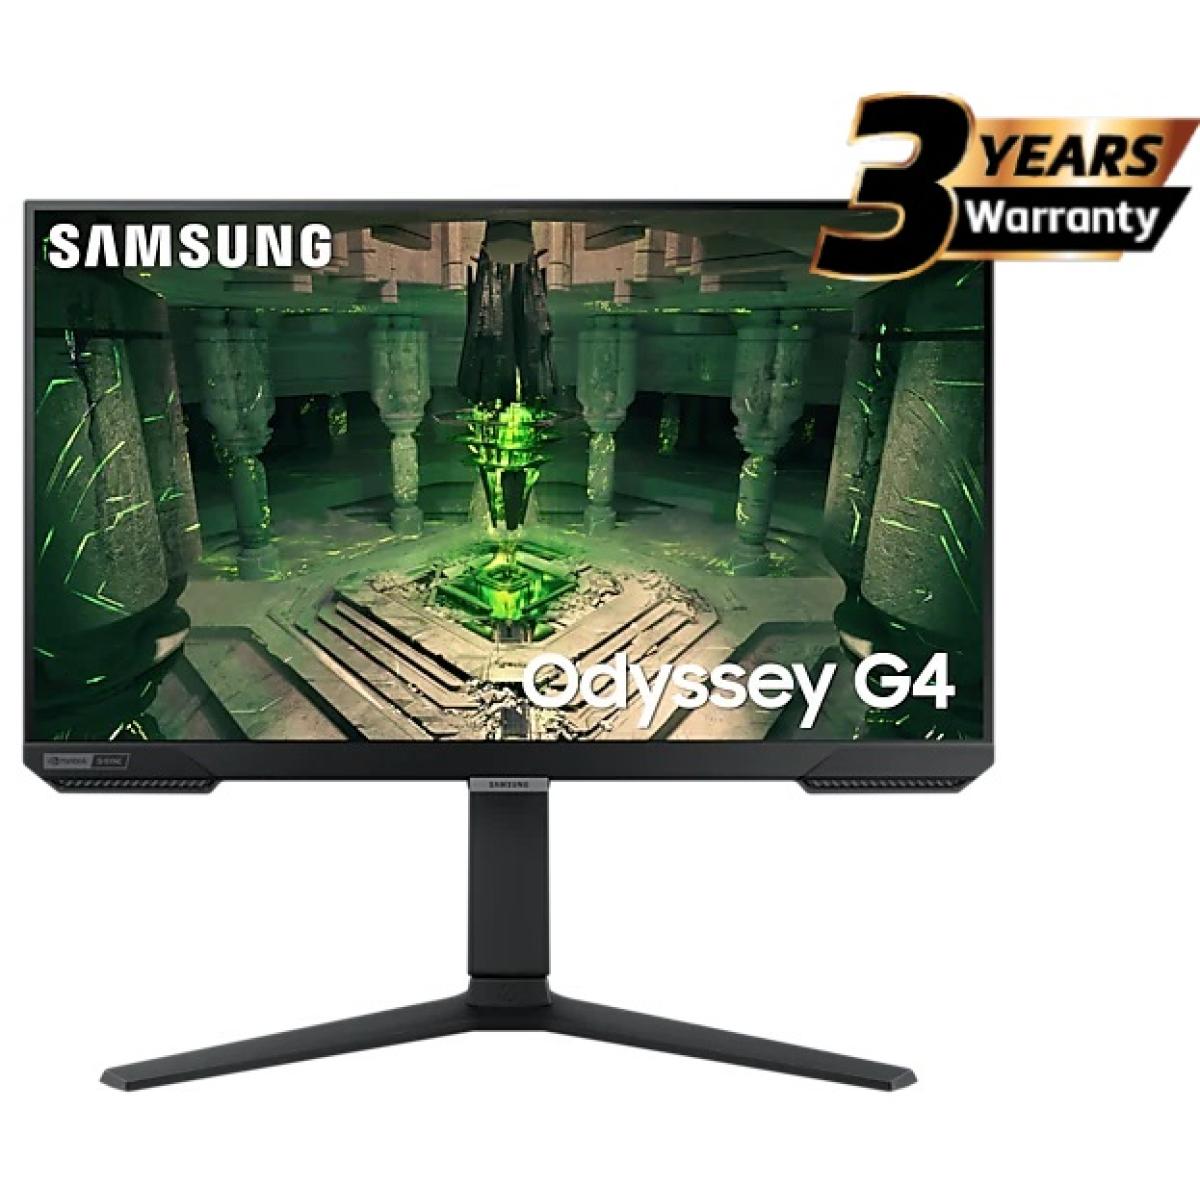 Samsung 27" FHD monitor with IPS panel, 240Hz refresh rate and 1ms response time